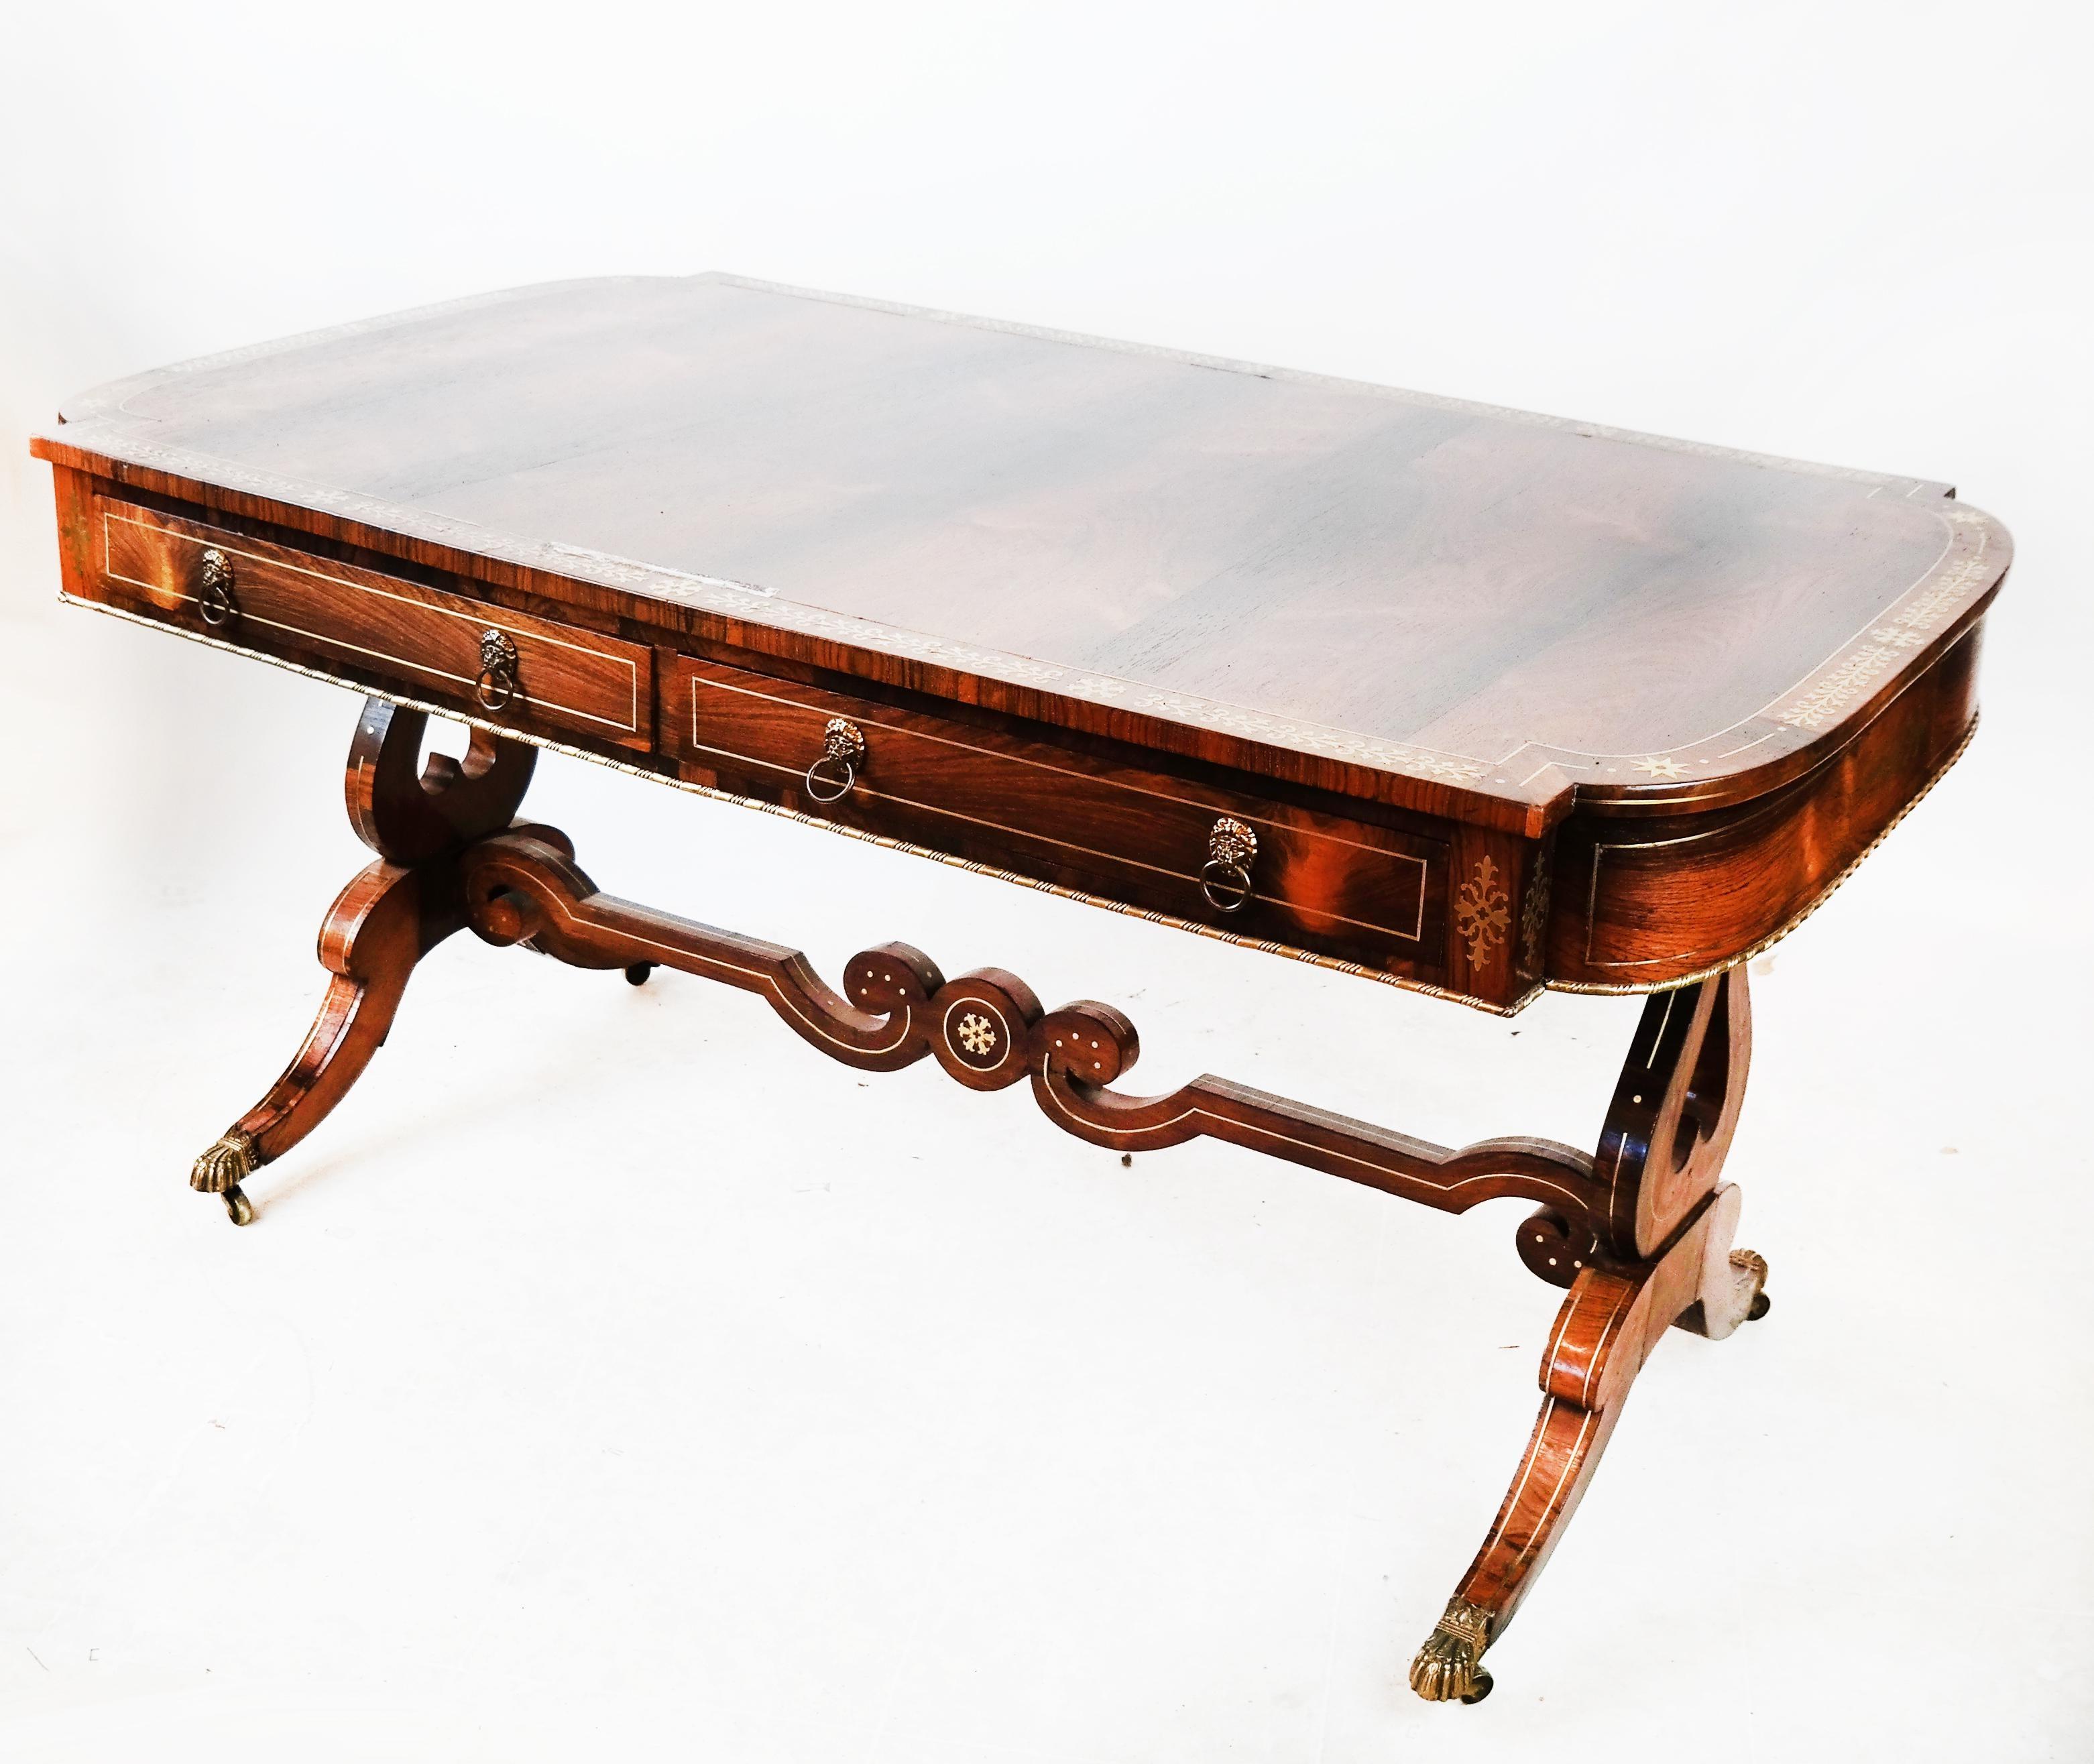 A very fine 19th century English Regency rosewood desk with brass inlay.